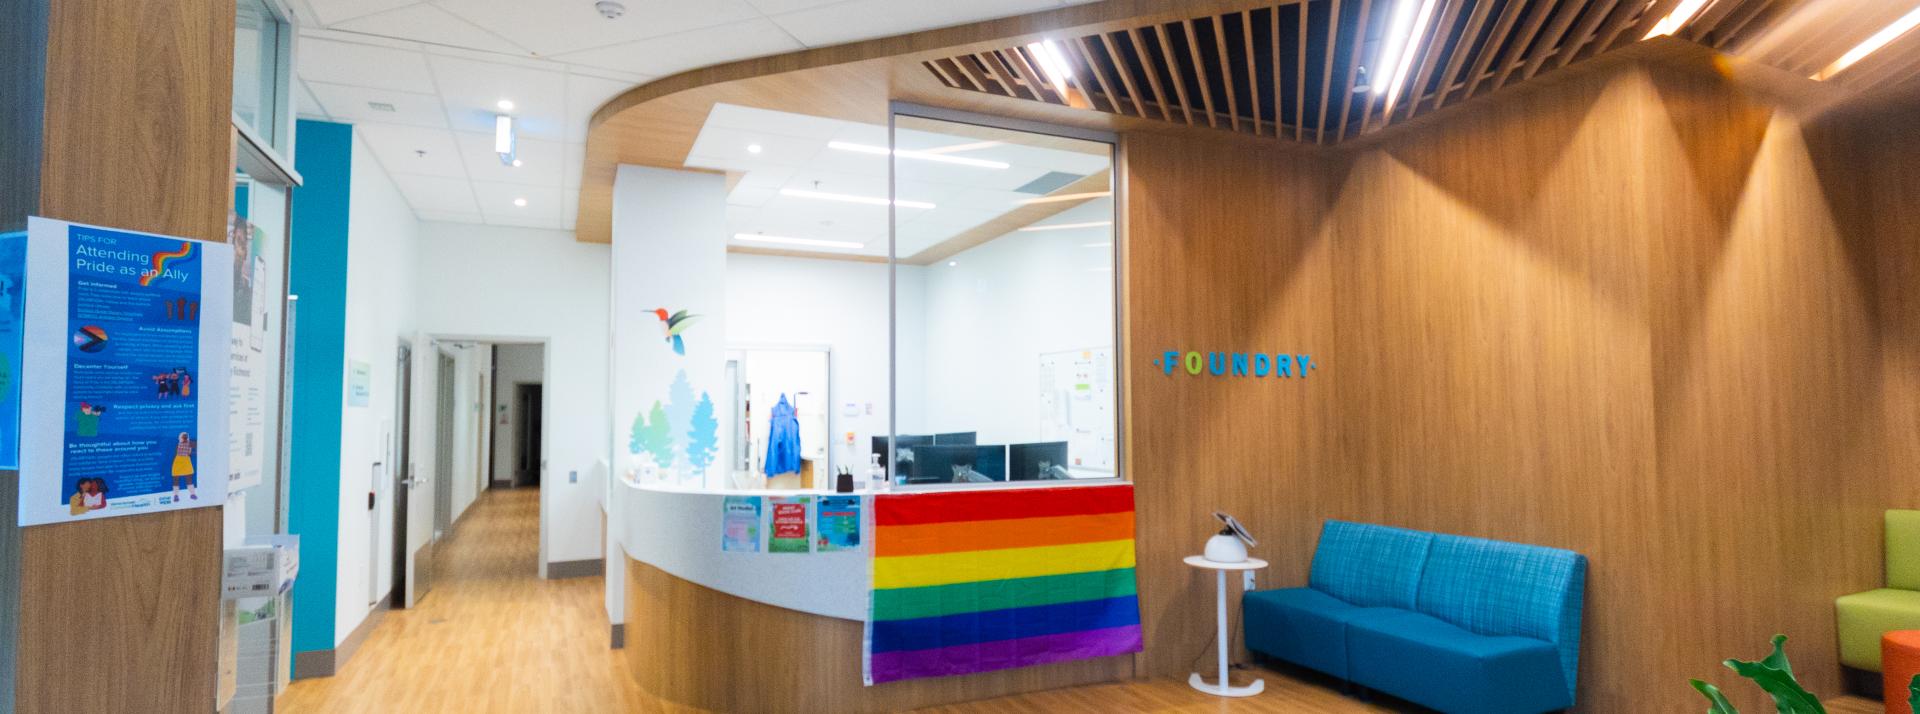 Reception area at Foundry Richmond. There is a large rainbow Pride flag hung at the reception desk.